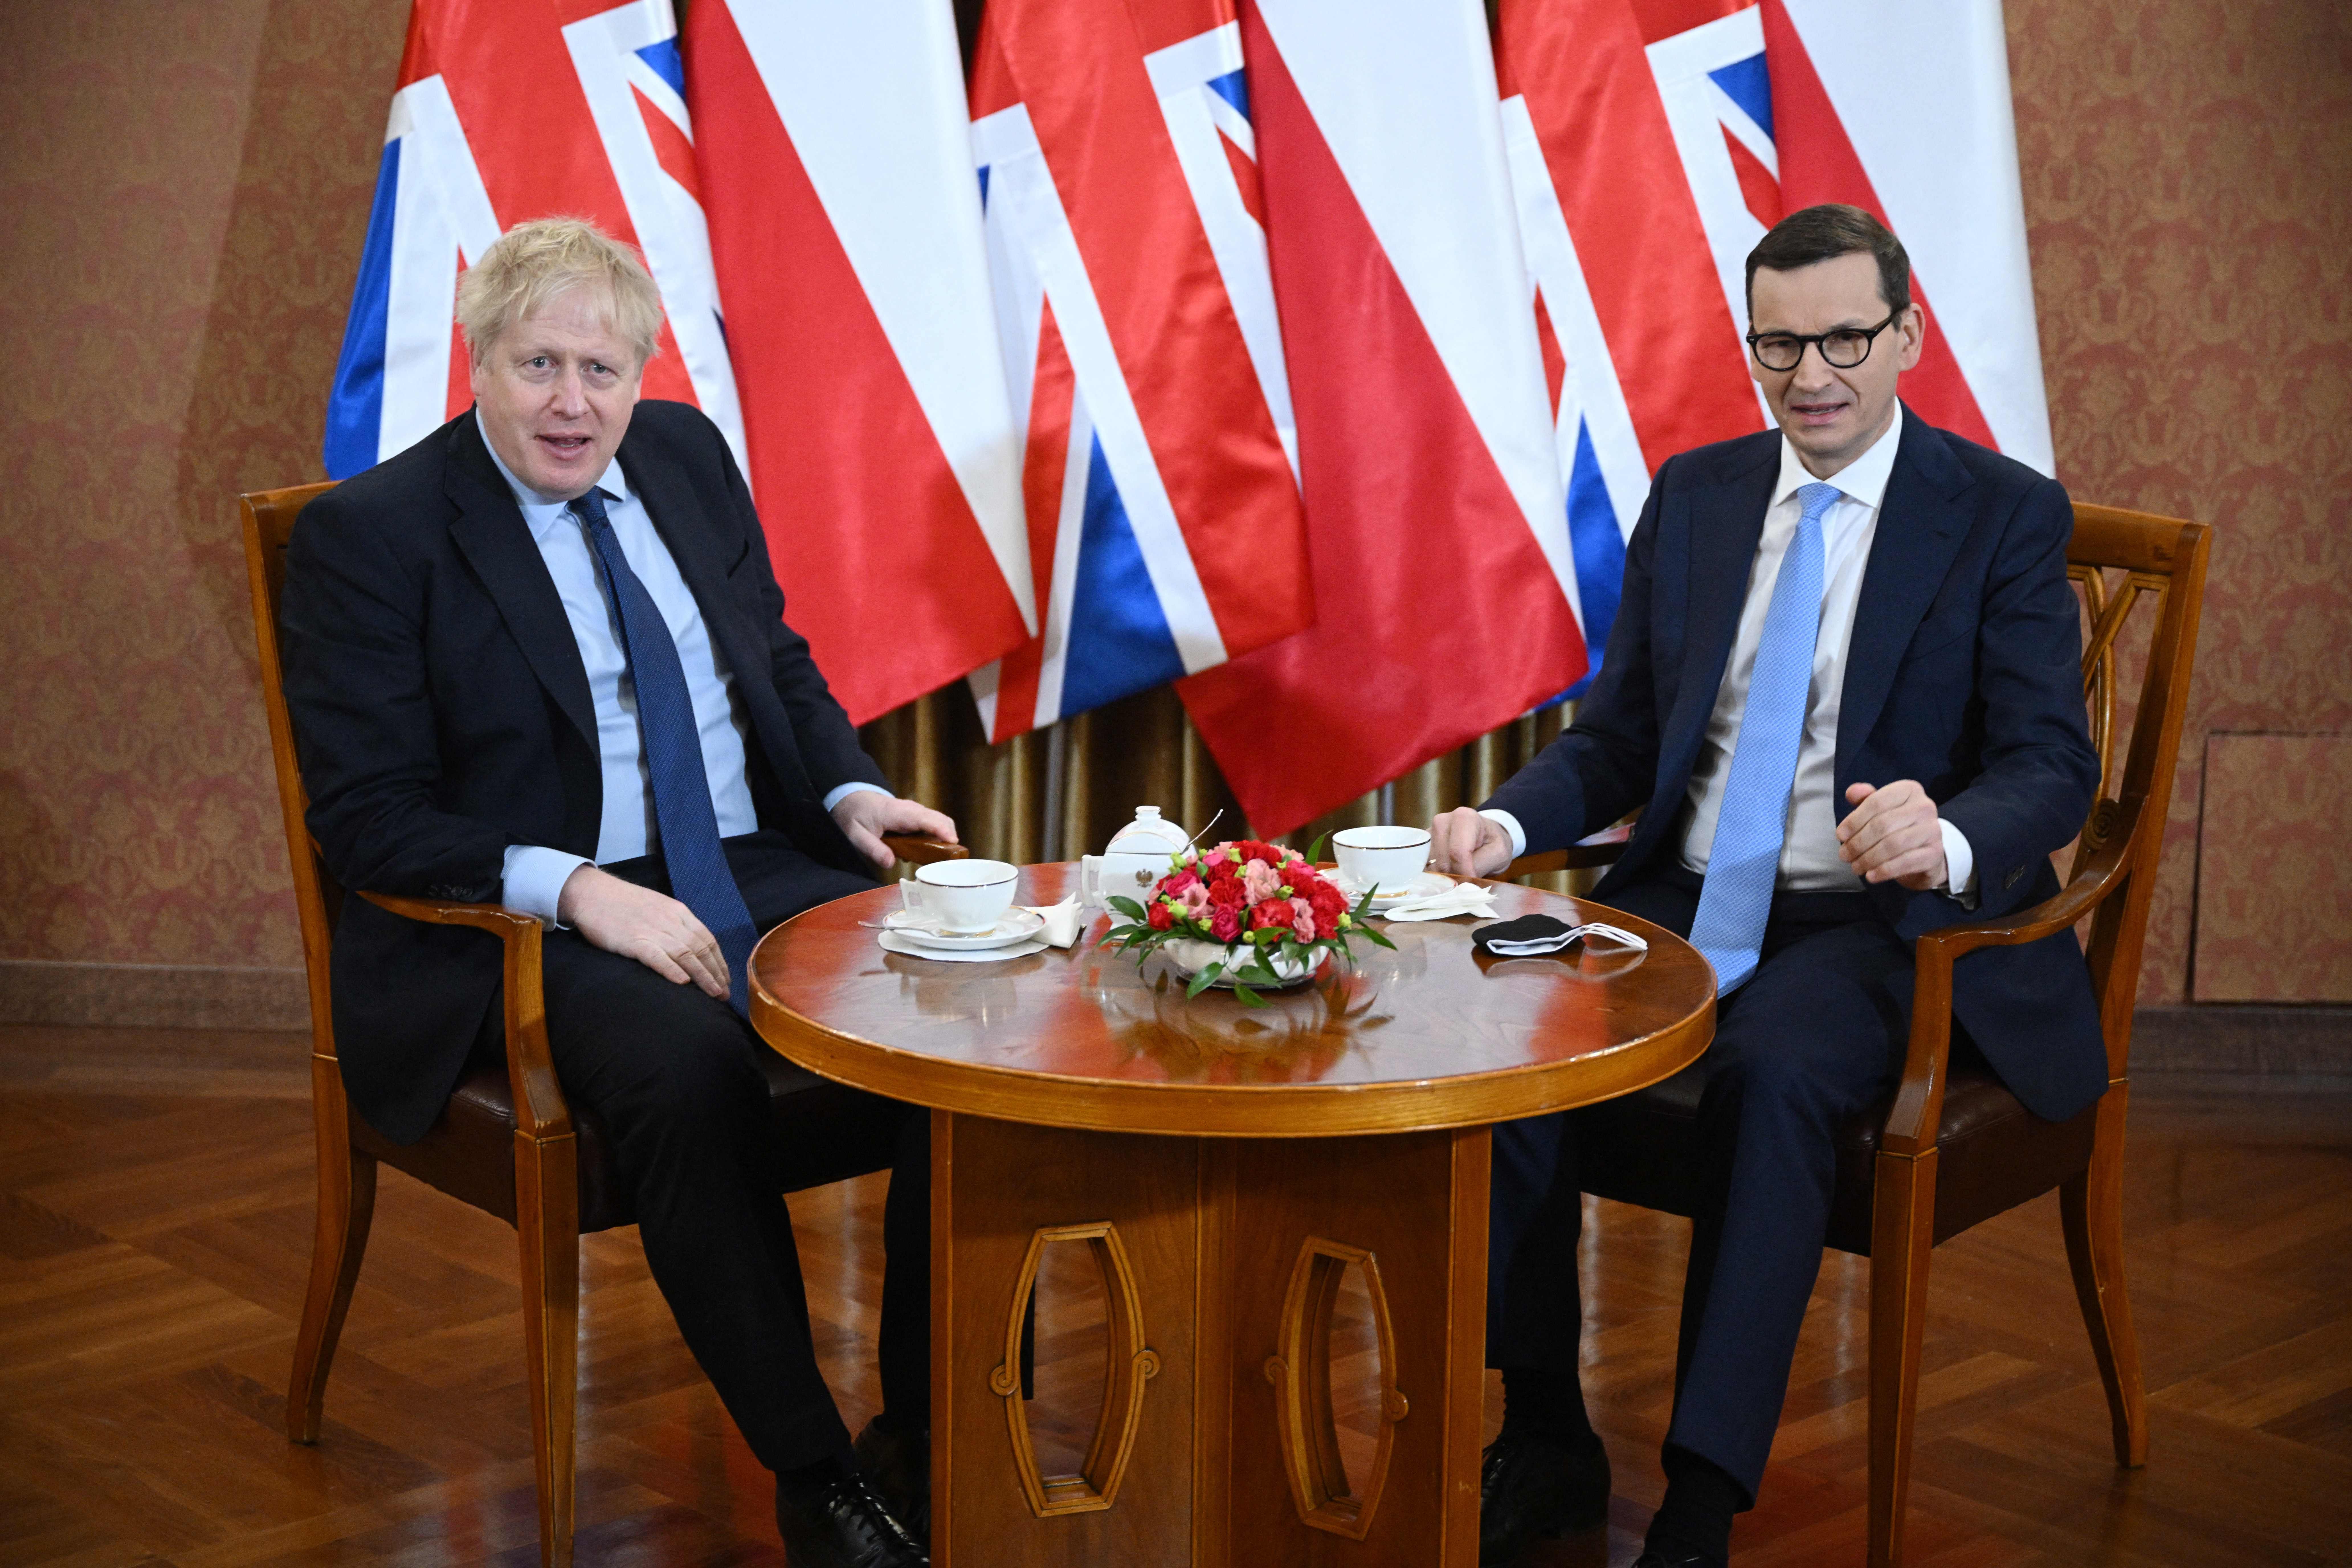 British Prime Minister Boris Johnson (L) and Polish Prime Minister Mateusz Morawiecki pictured together at the Chancellery in Warsaw, Poland on March 1.